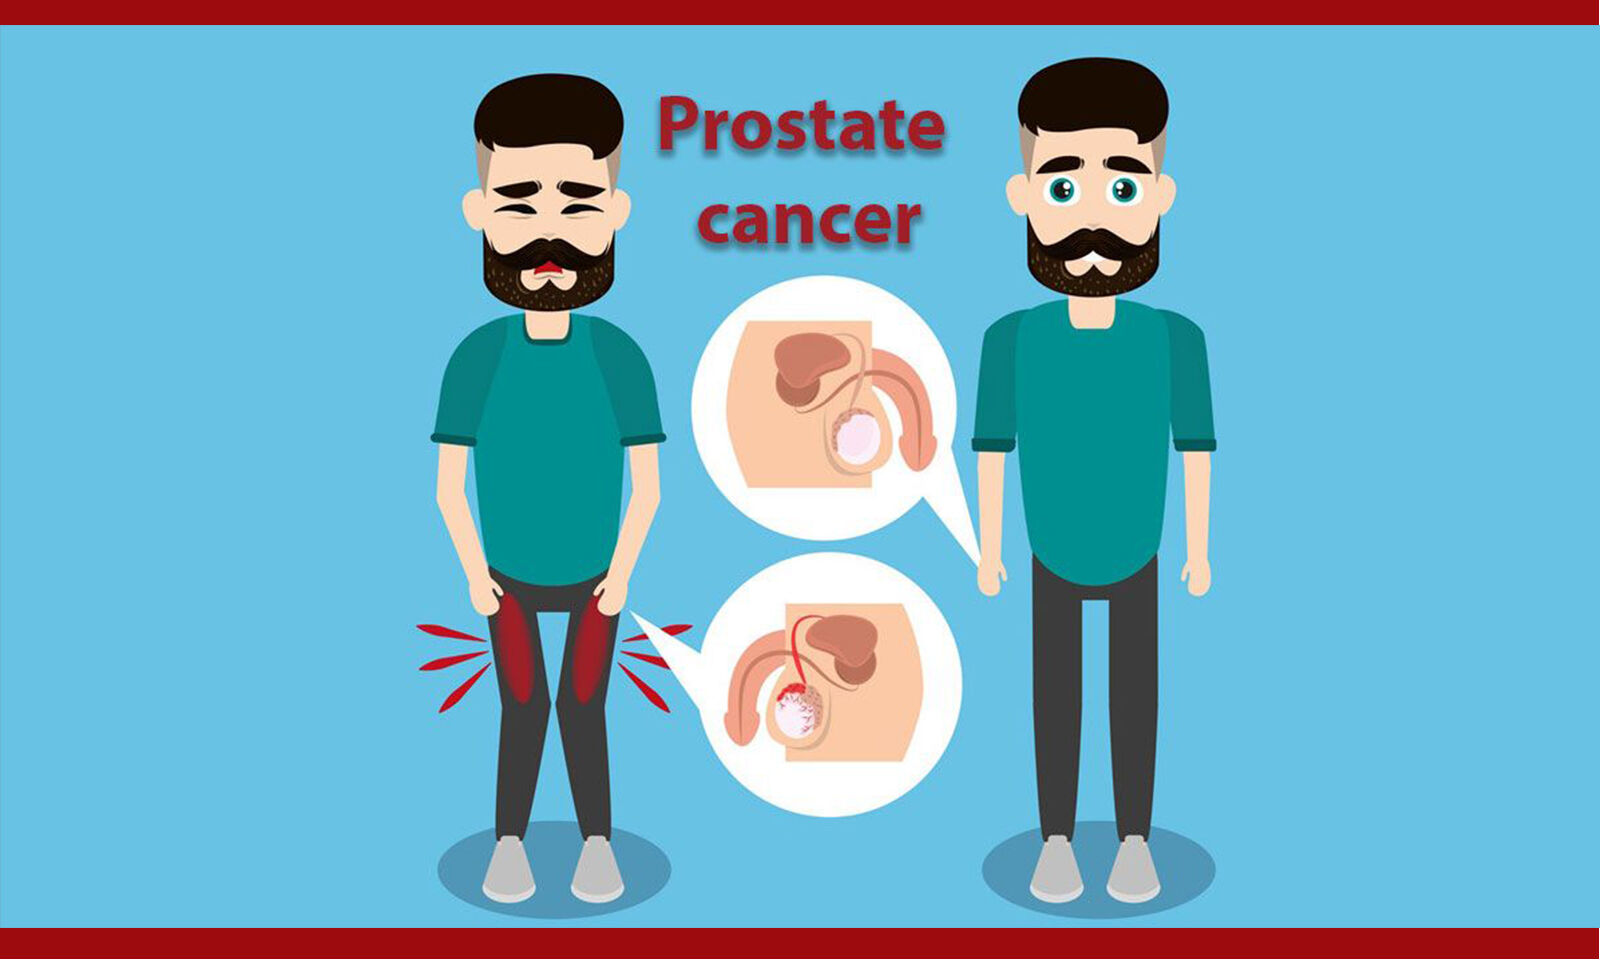 Will every man get prostate cancer